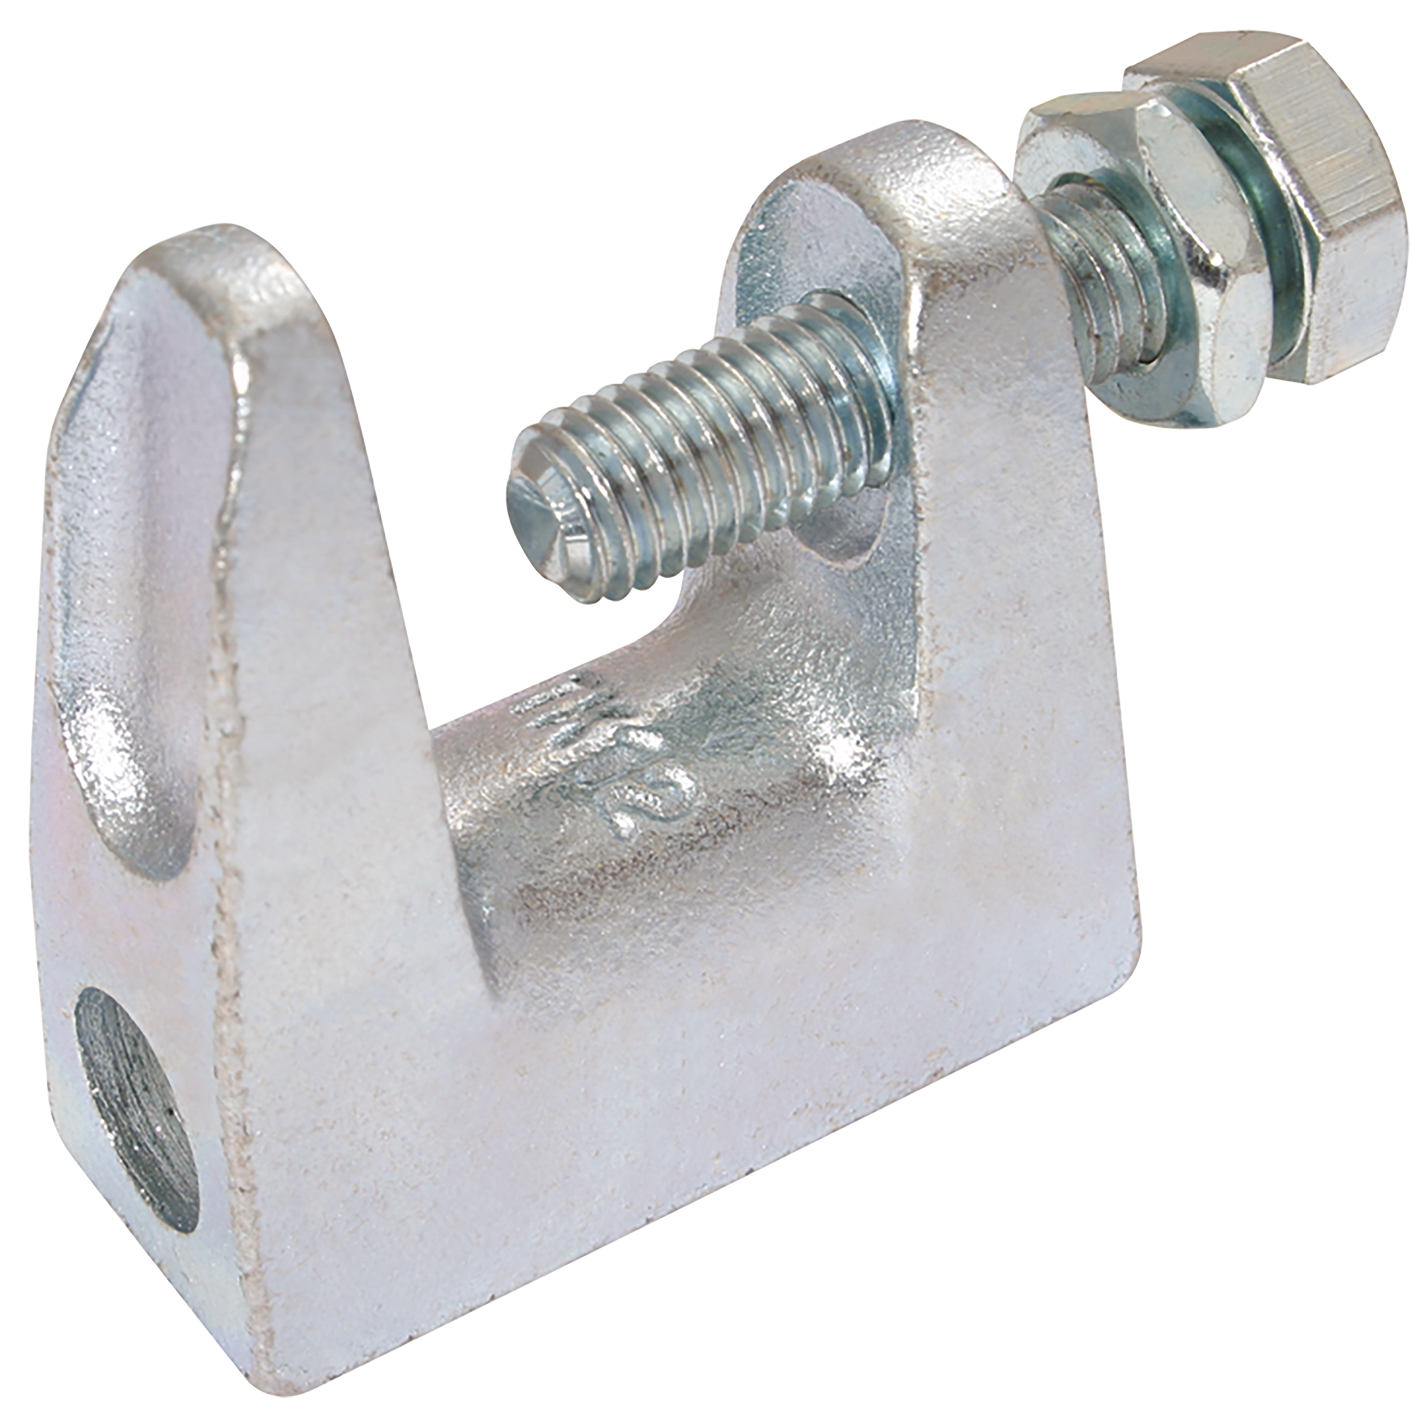 M12 BEAM CLAMP | Mourne Hydraulics